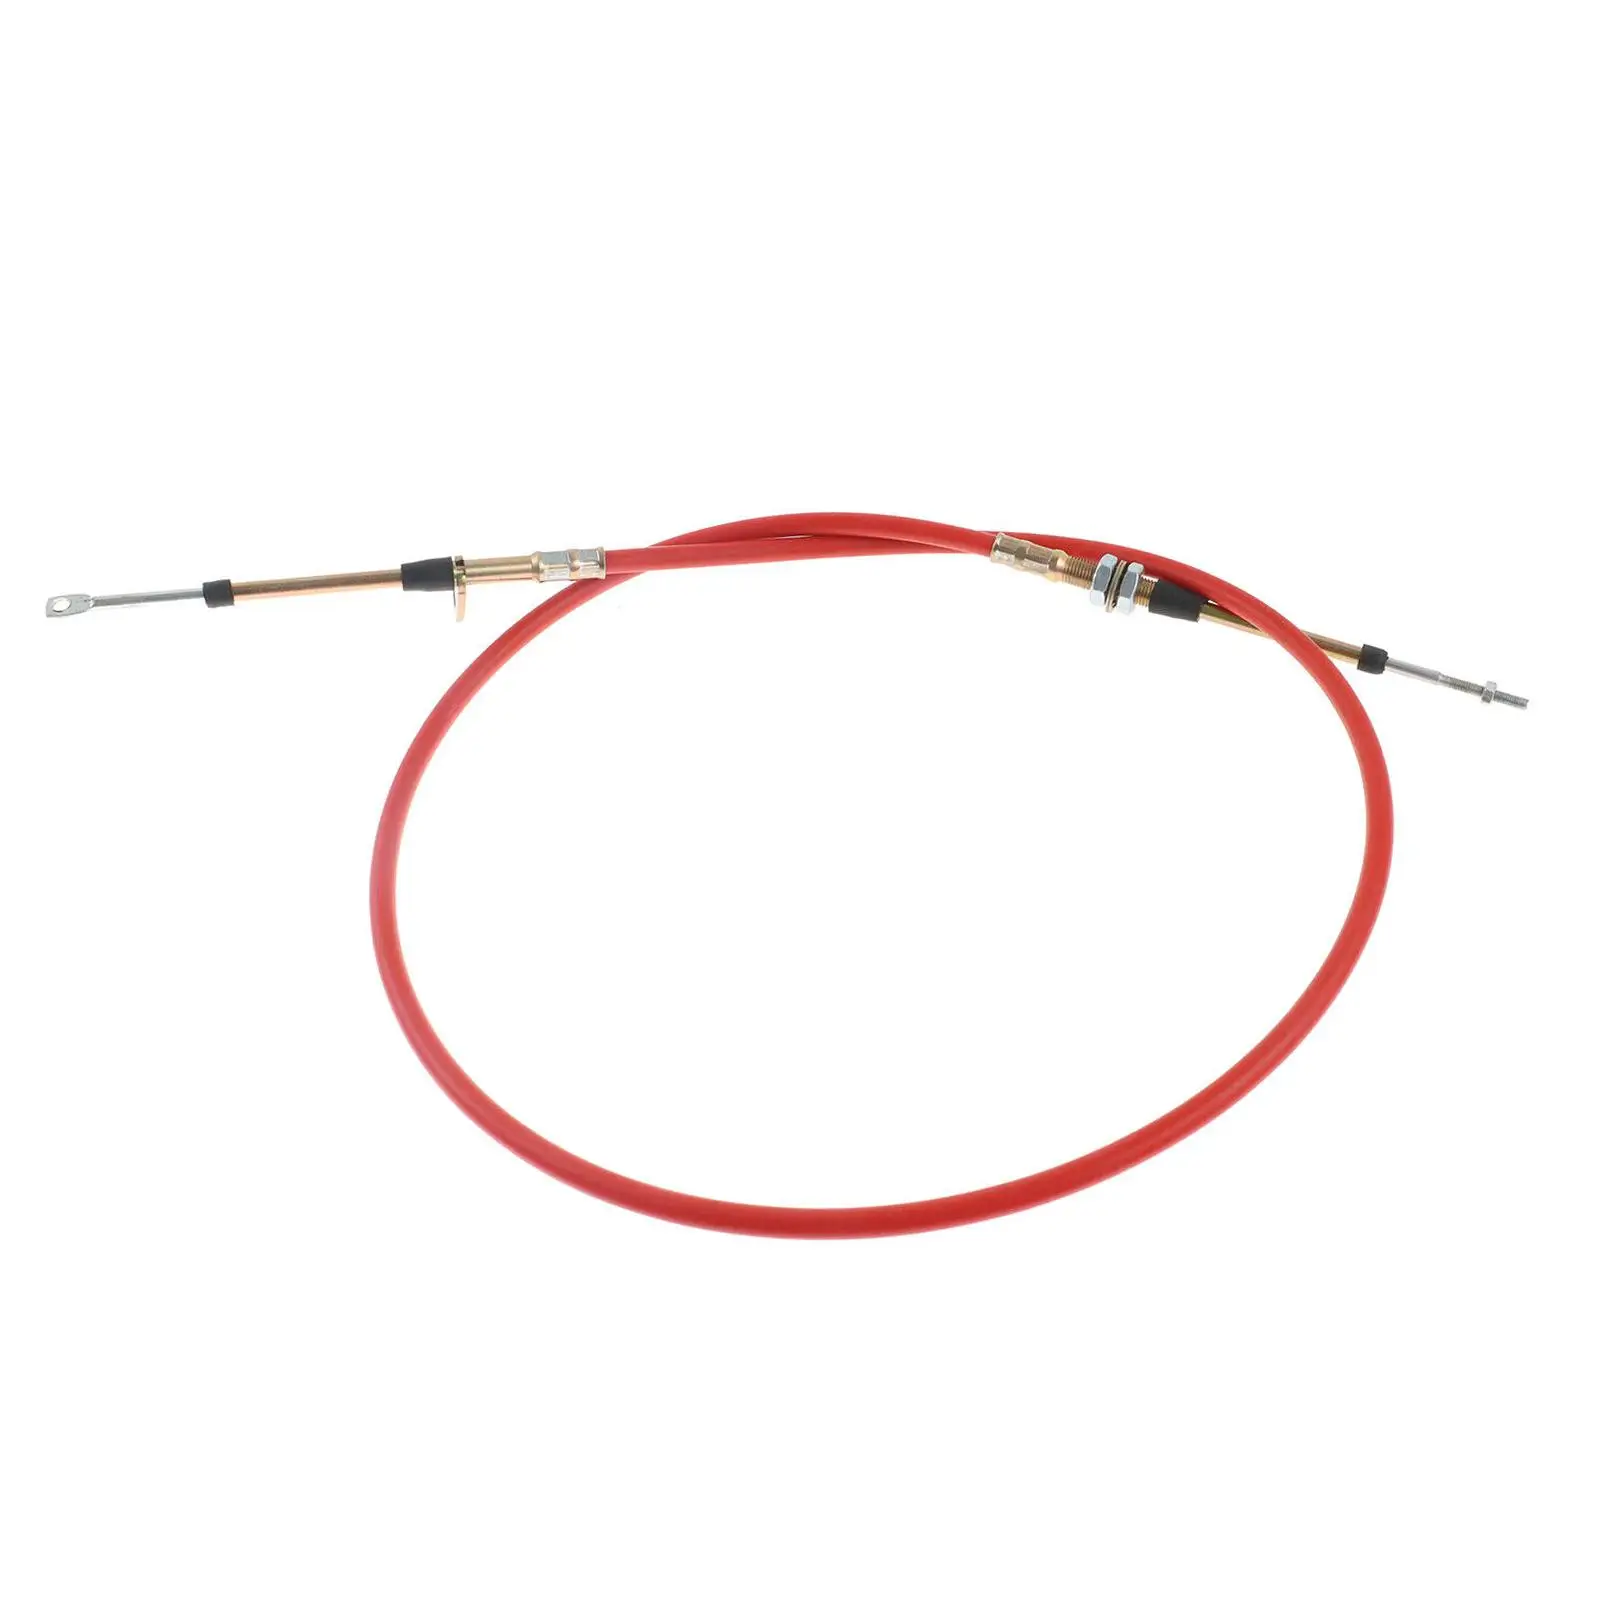 Shifter Cable Car Accessories AF721002 for B M Shifters Professional Long Service Life High Performance Easy to Mount